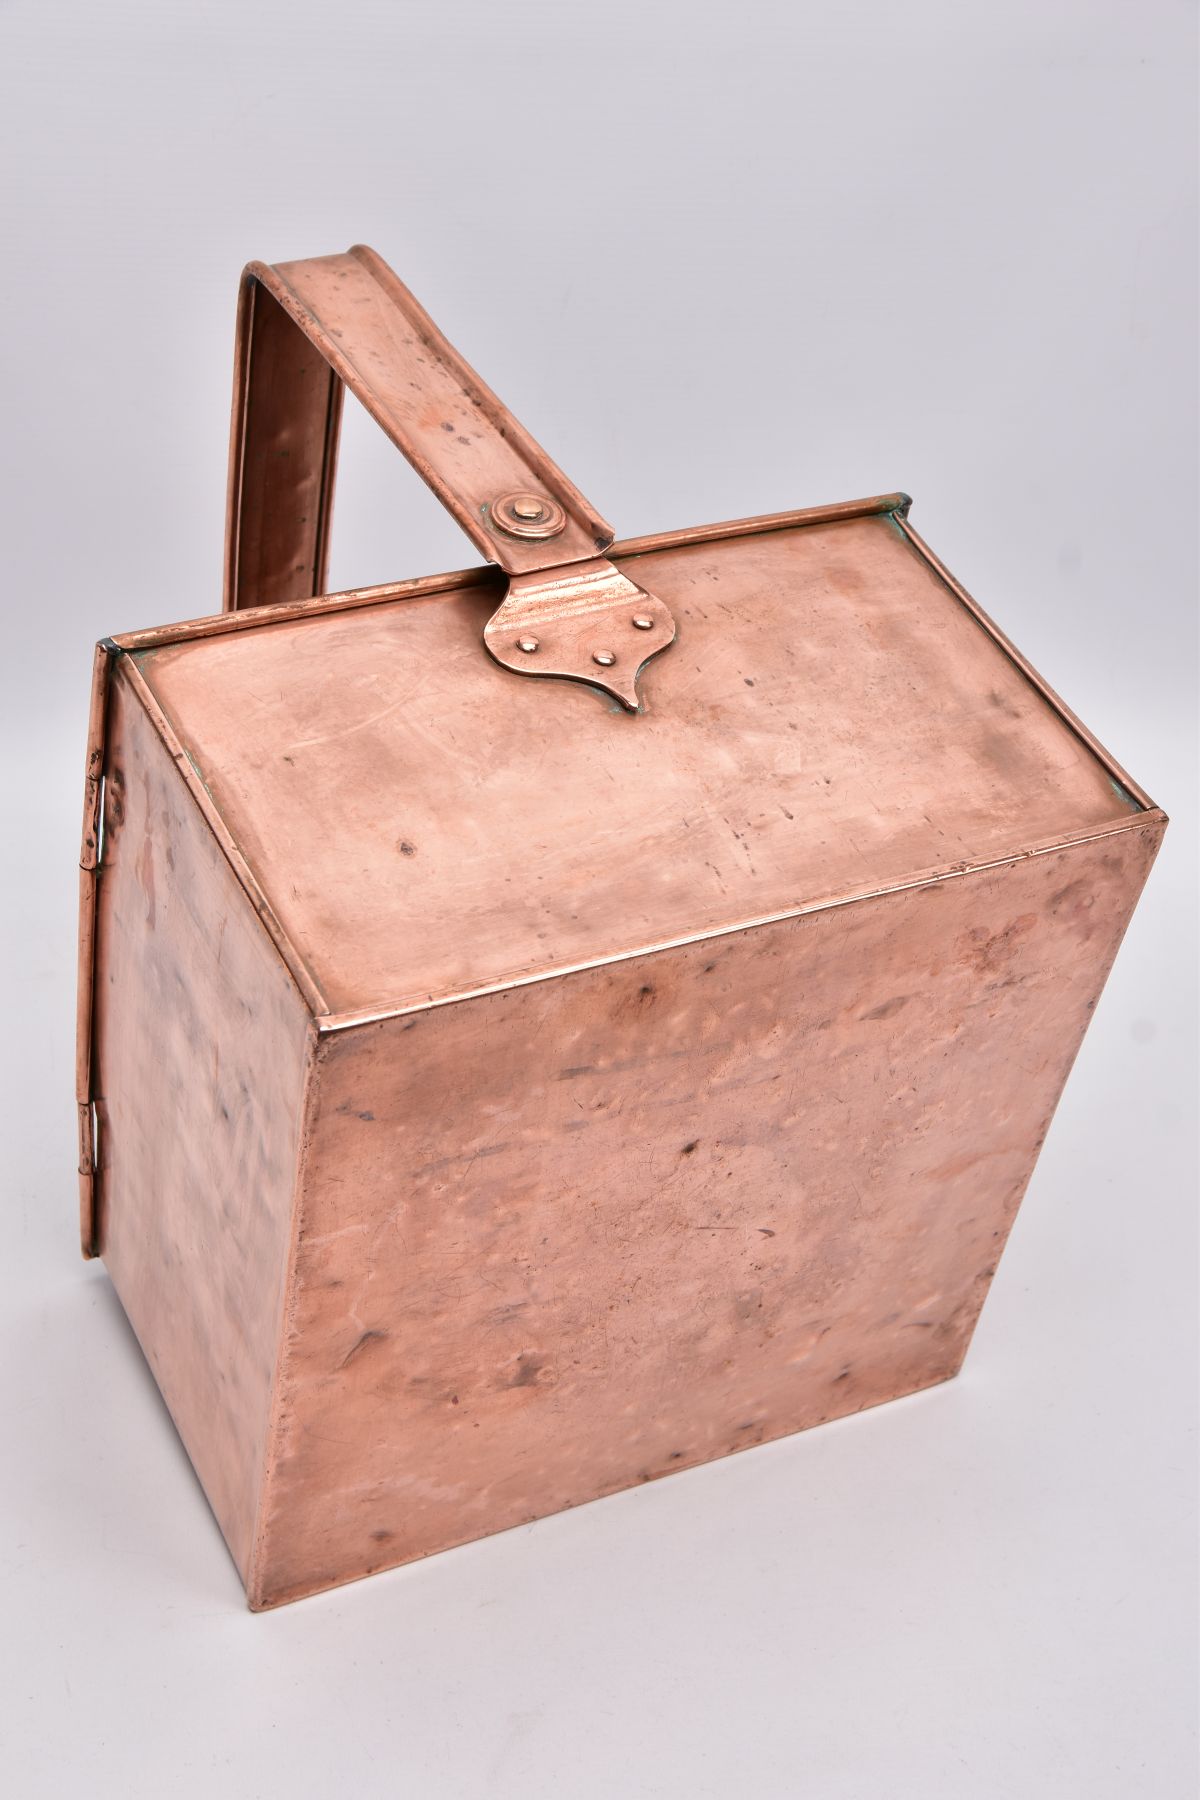 A BULPITT & SONS COPPER SWING HANDLED STORAGE BOX, date stamped 1915, missing cover, approximate - Image 6 of 6